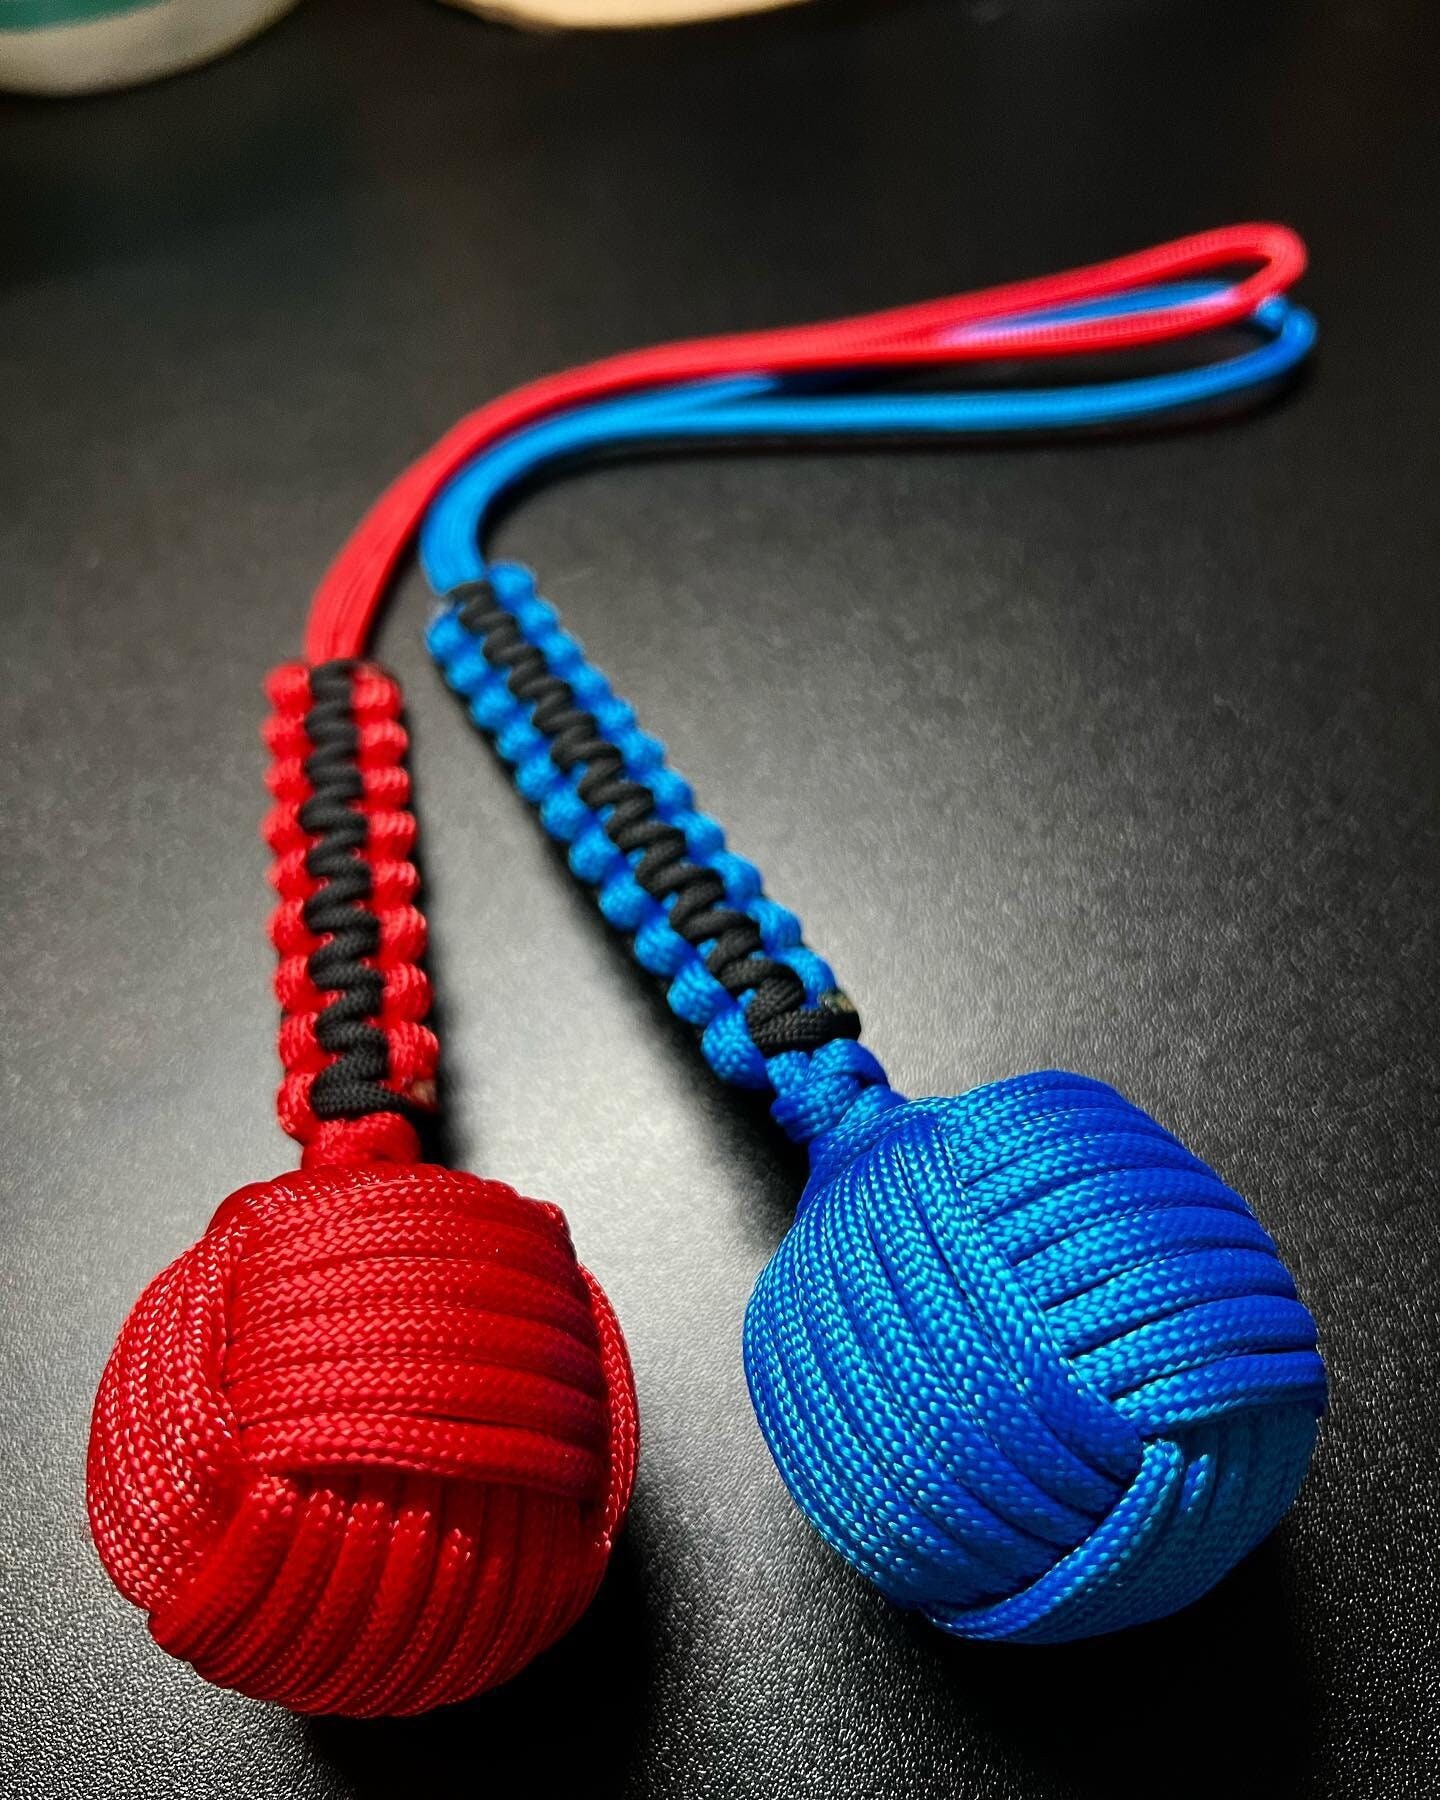 MAXI-MONKEY Paracord Jig Makes All Sizes of Ball Knots 